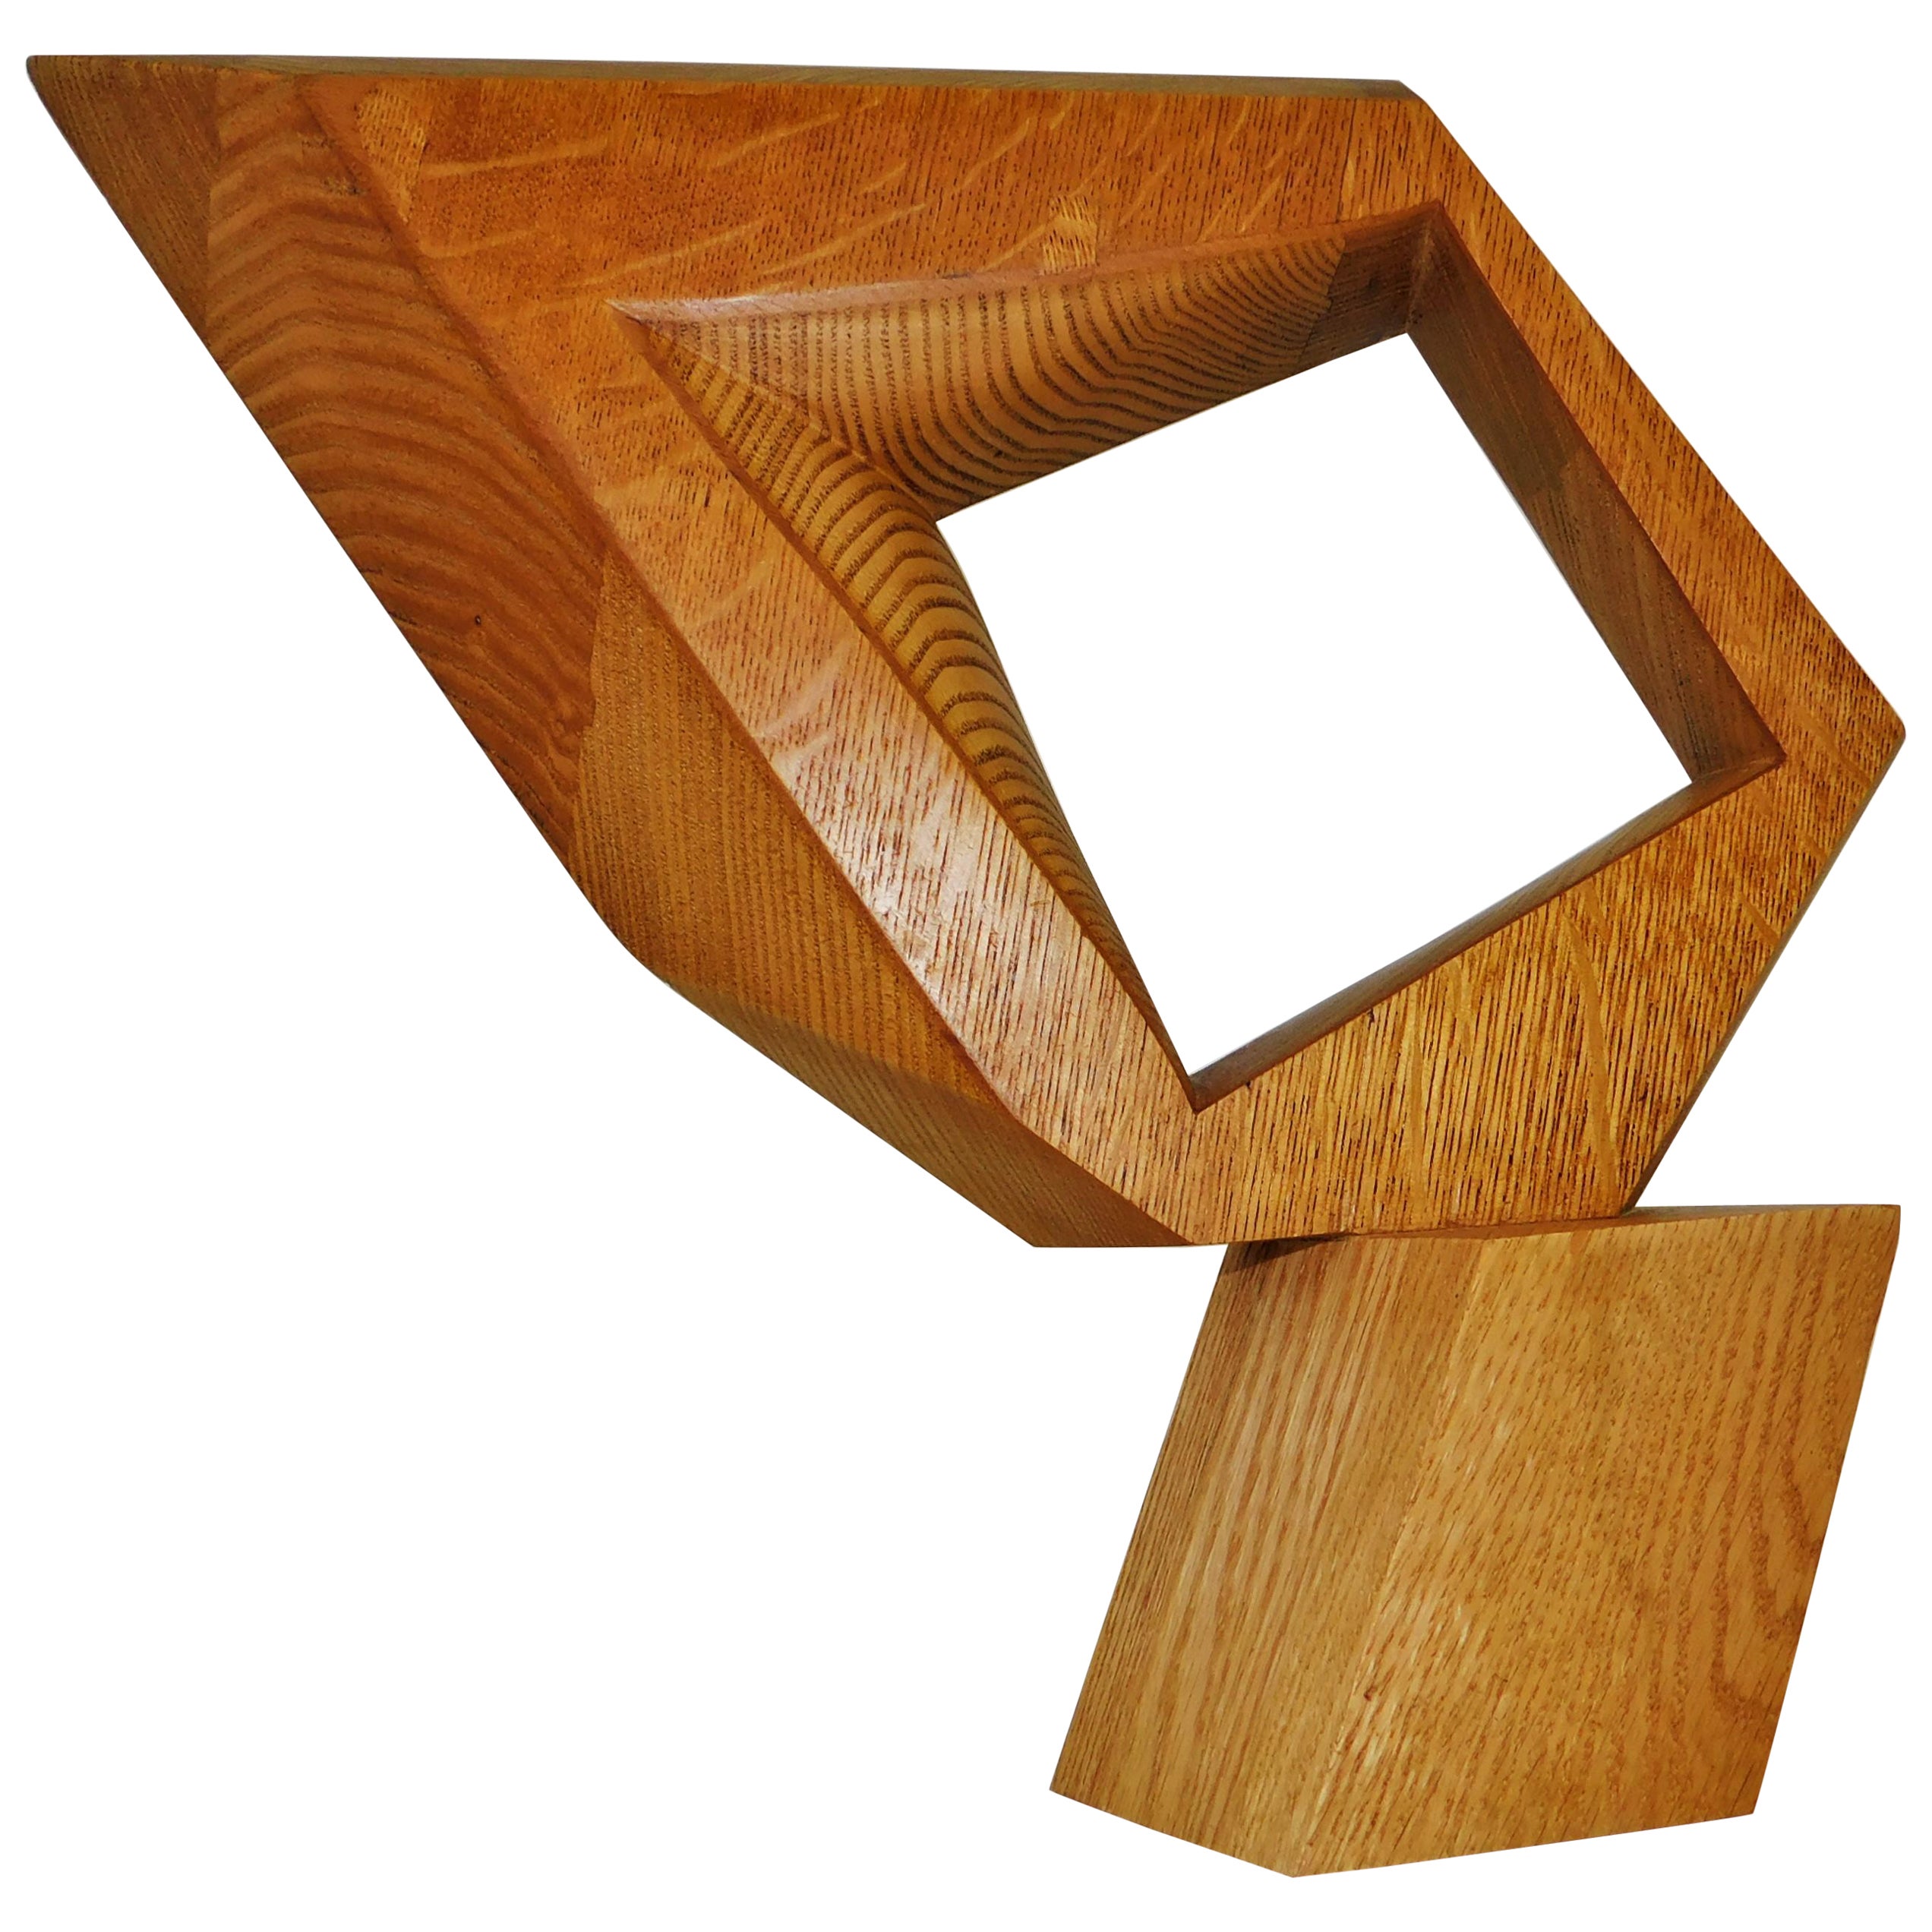 Signed Modern Abstract Constructivist Styled Wooden Oak Sculpture For Sale